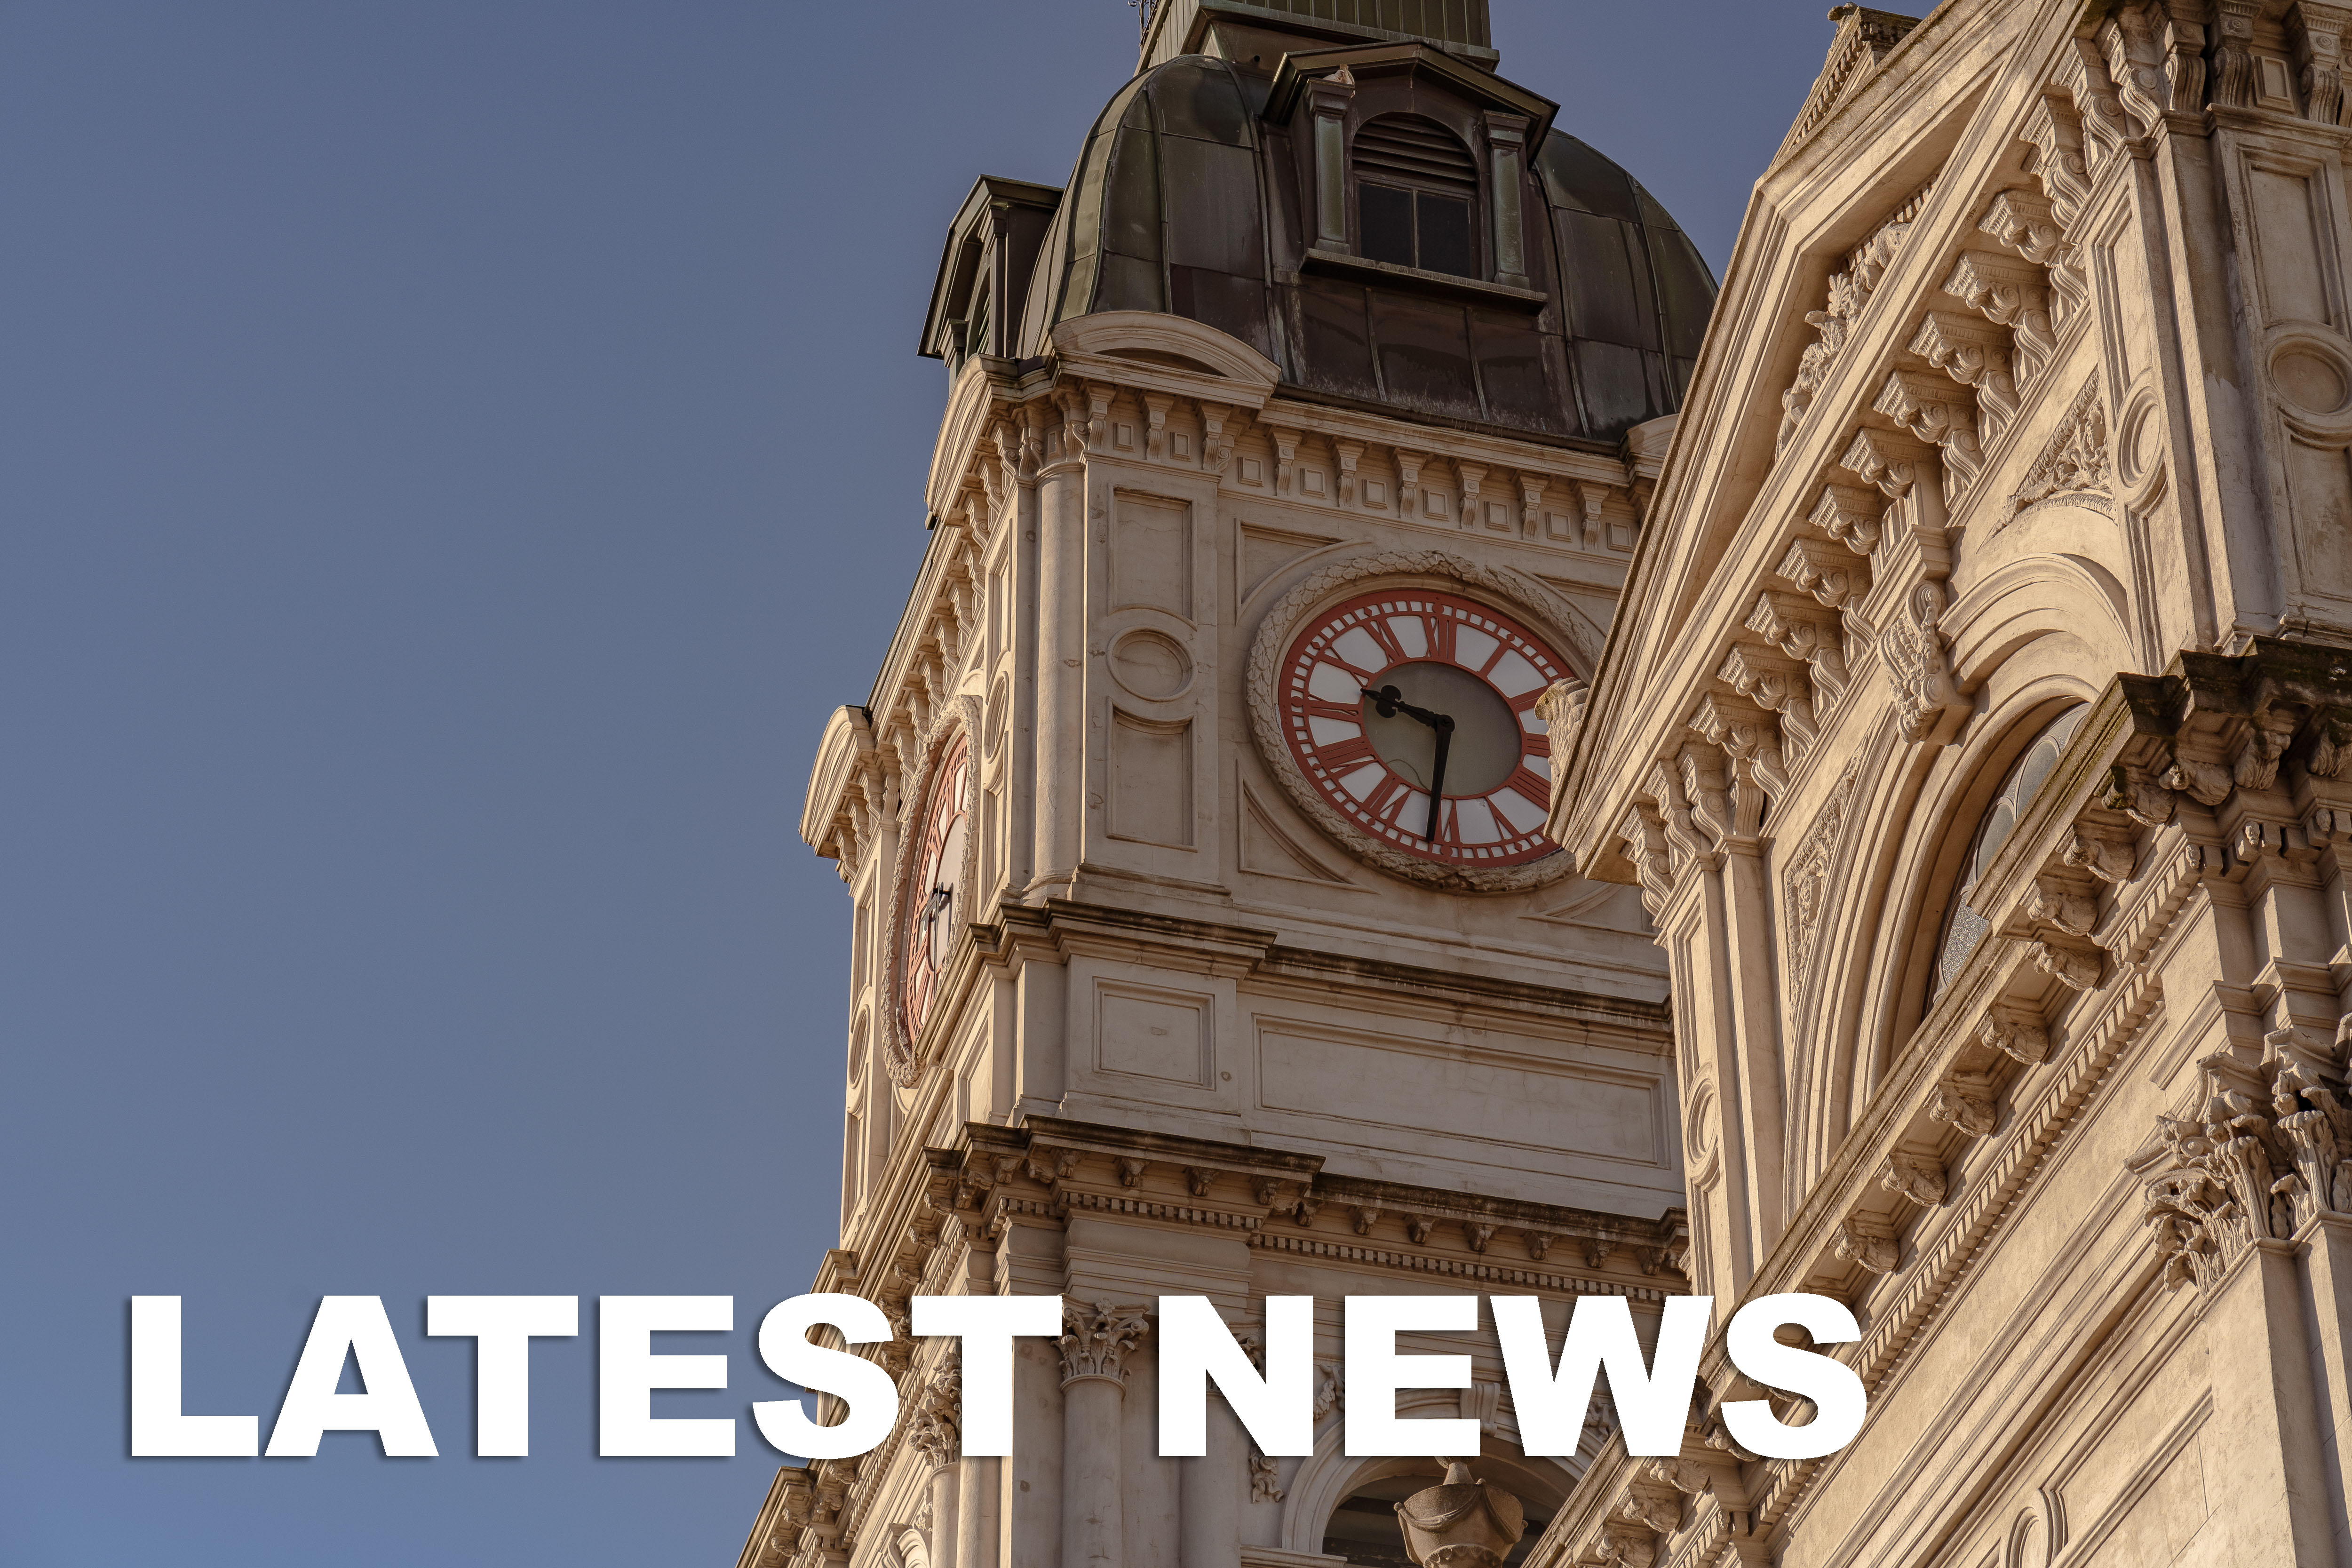 Image of Town Hall clock tour with text that reads latest news